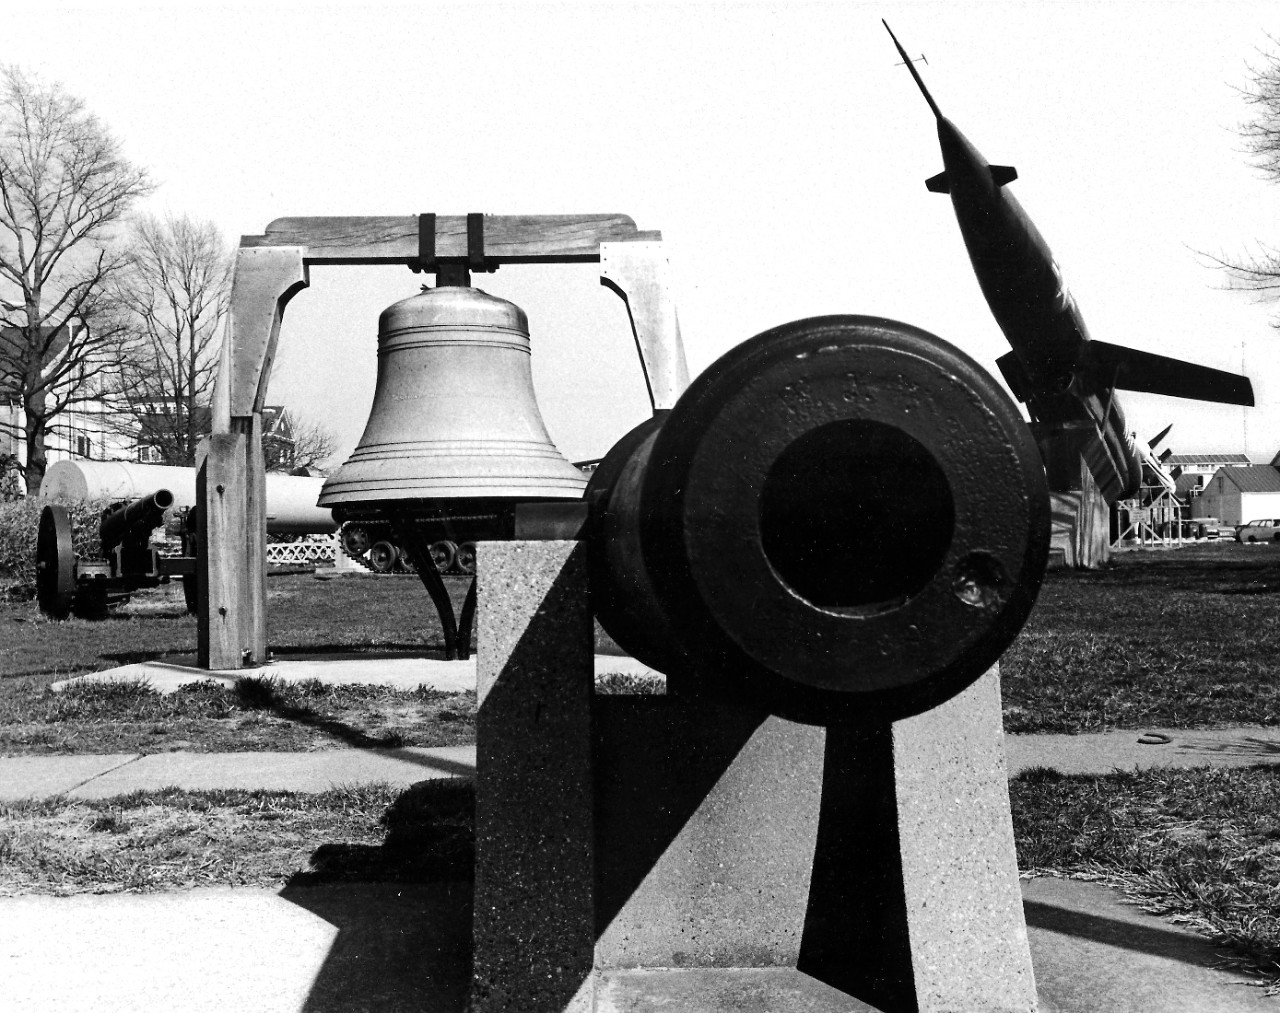 NMUSN-146:  Willard Park, Washington Navy Yard, Washington, D.C. 1970s.   View faces north, showing a smooth-bore cannon barrel, with a lighthouse bell from 1897 behind.   A Regulus II missile is to the right.   National Museum of the U.S. Navy Photograph Collection.  